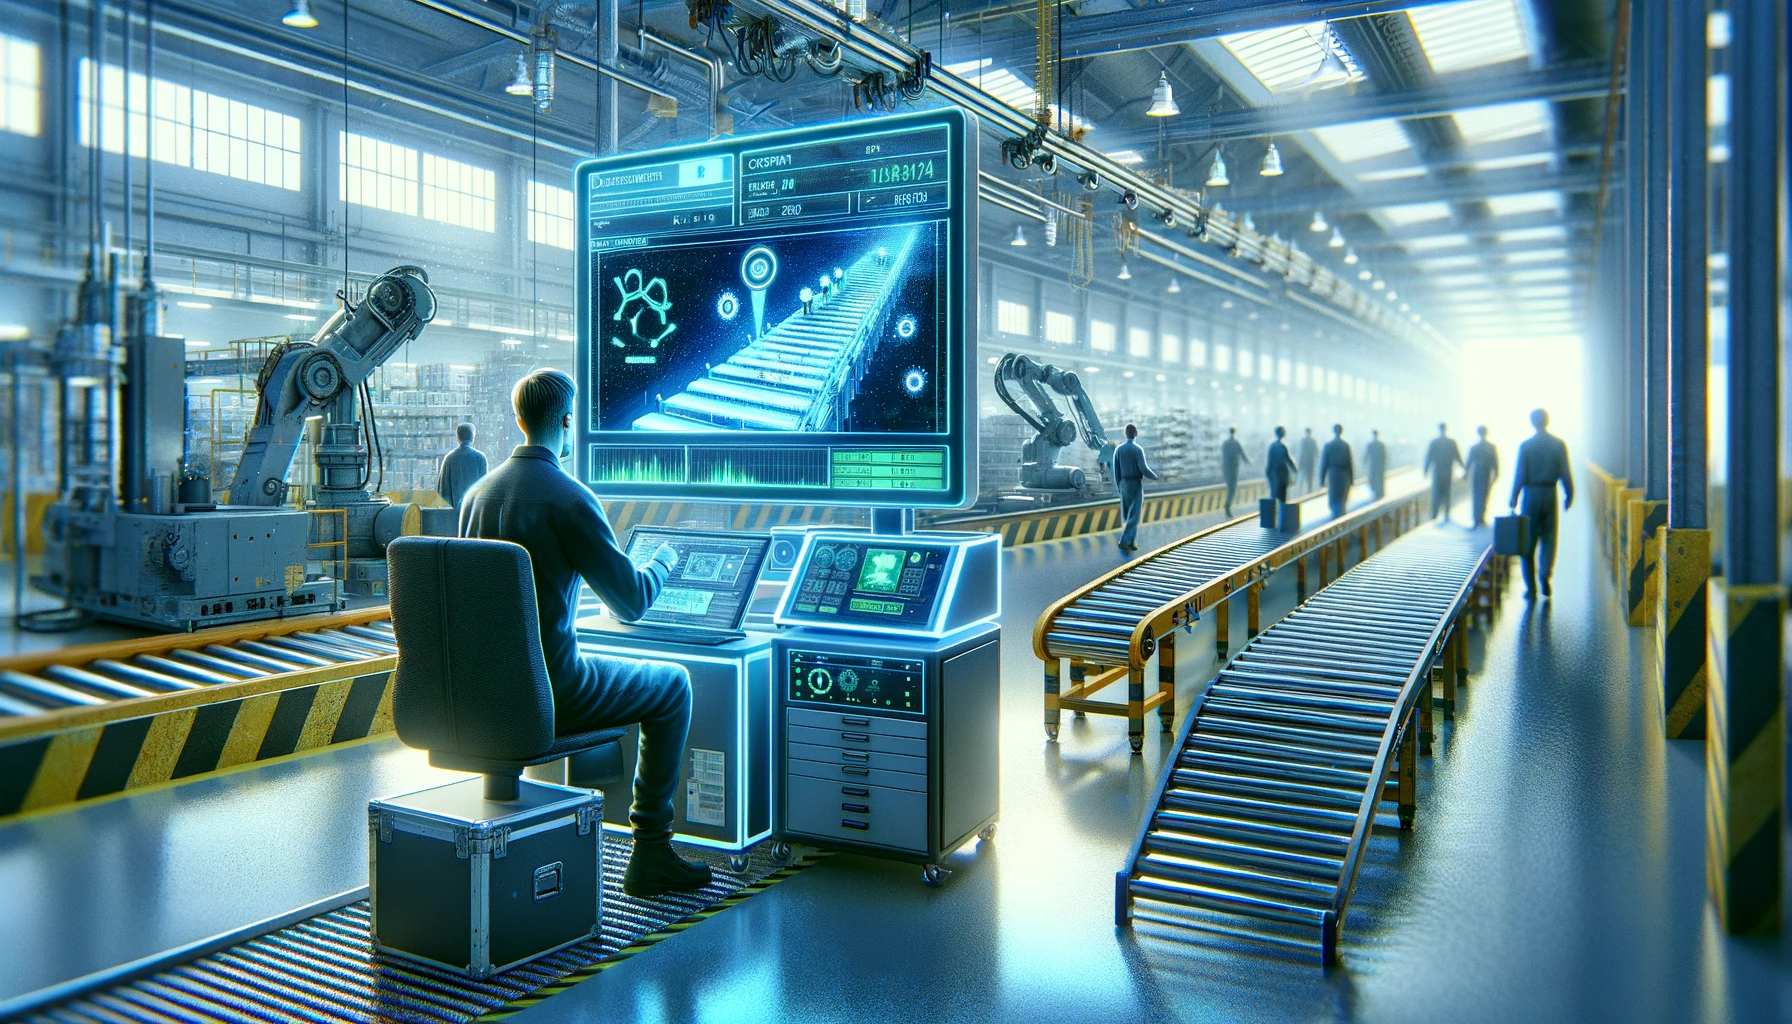 It features a technician in a brightly lit industrial setting, engaging with a high-tech monitor that displays defects on products moving on a conveyor belt.